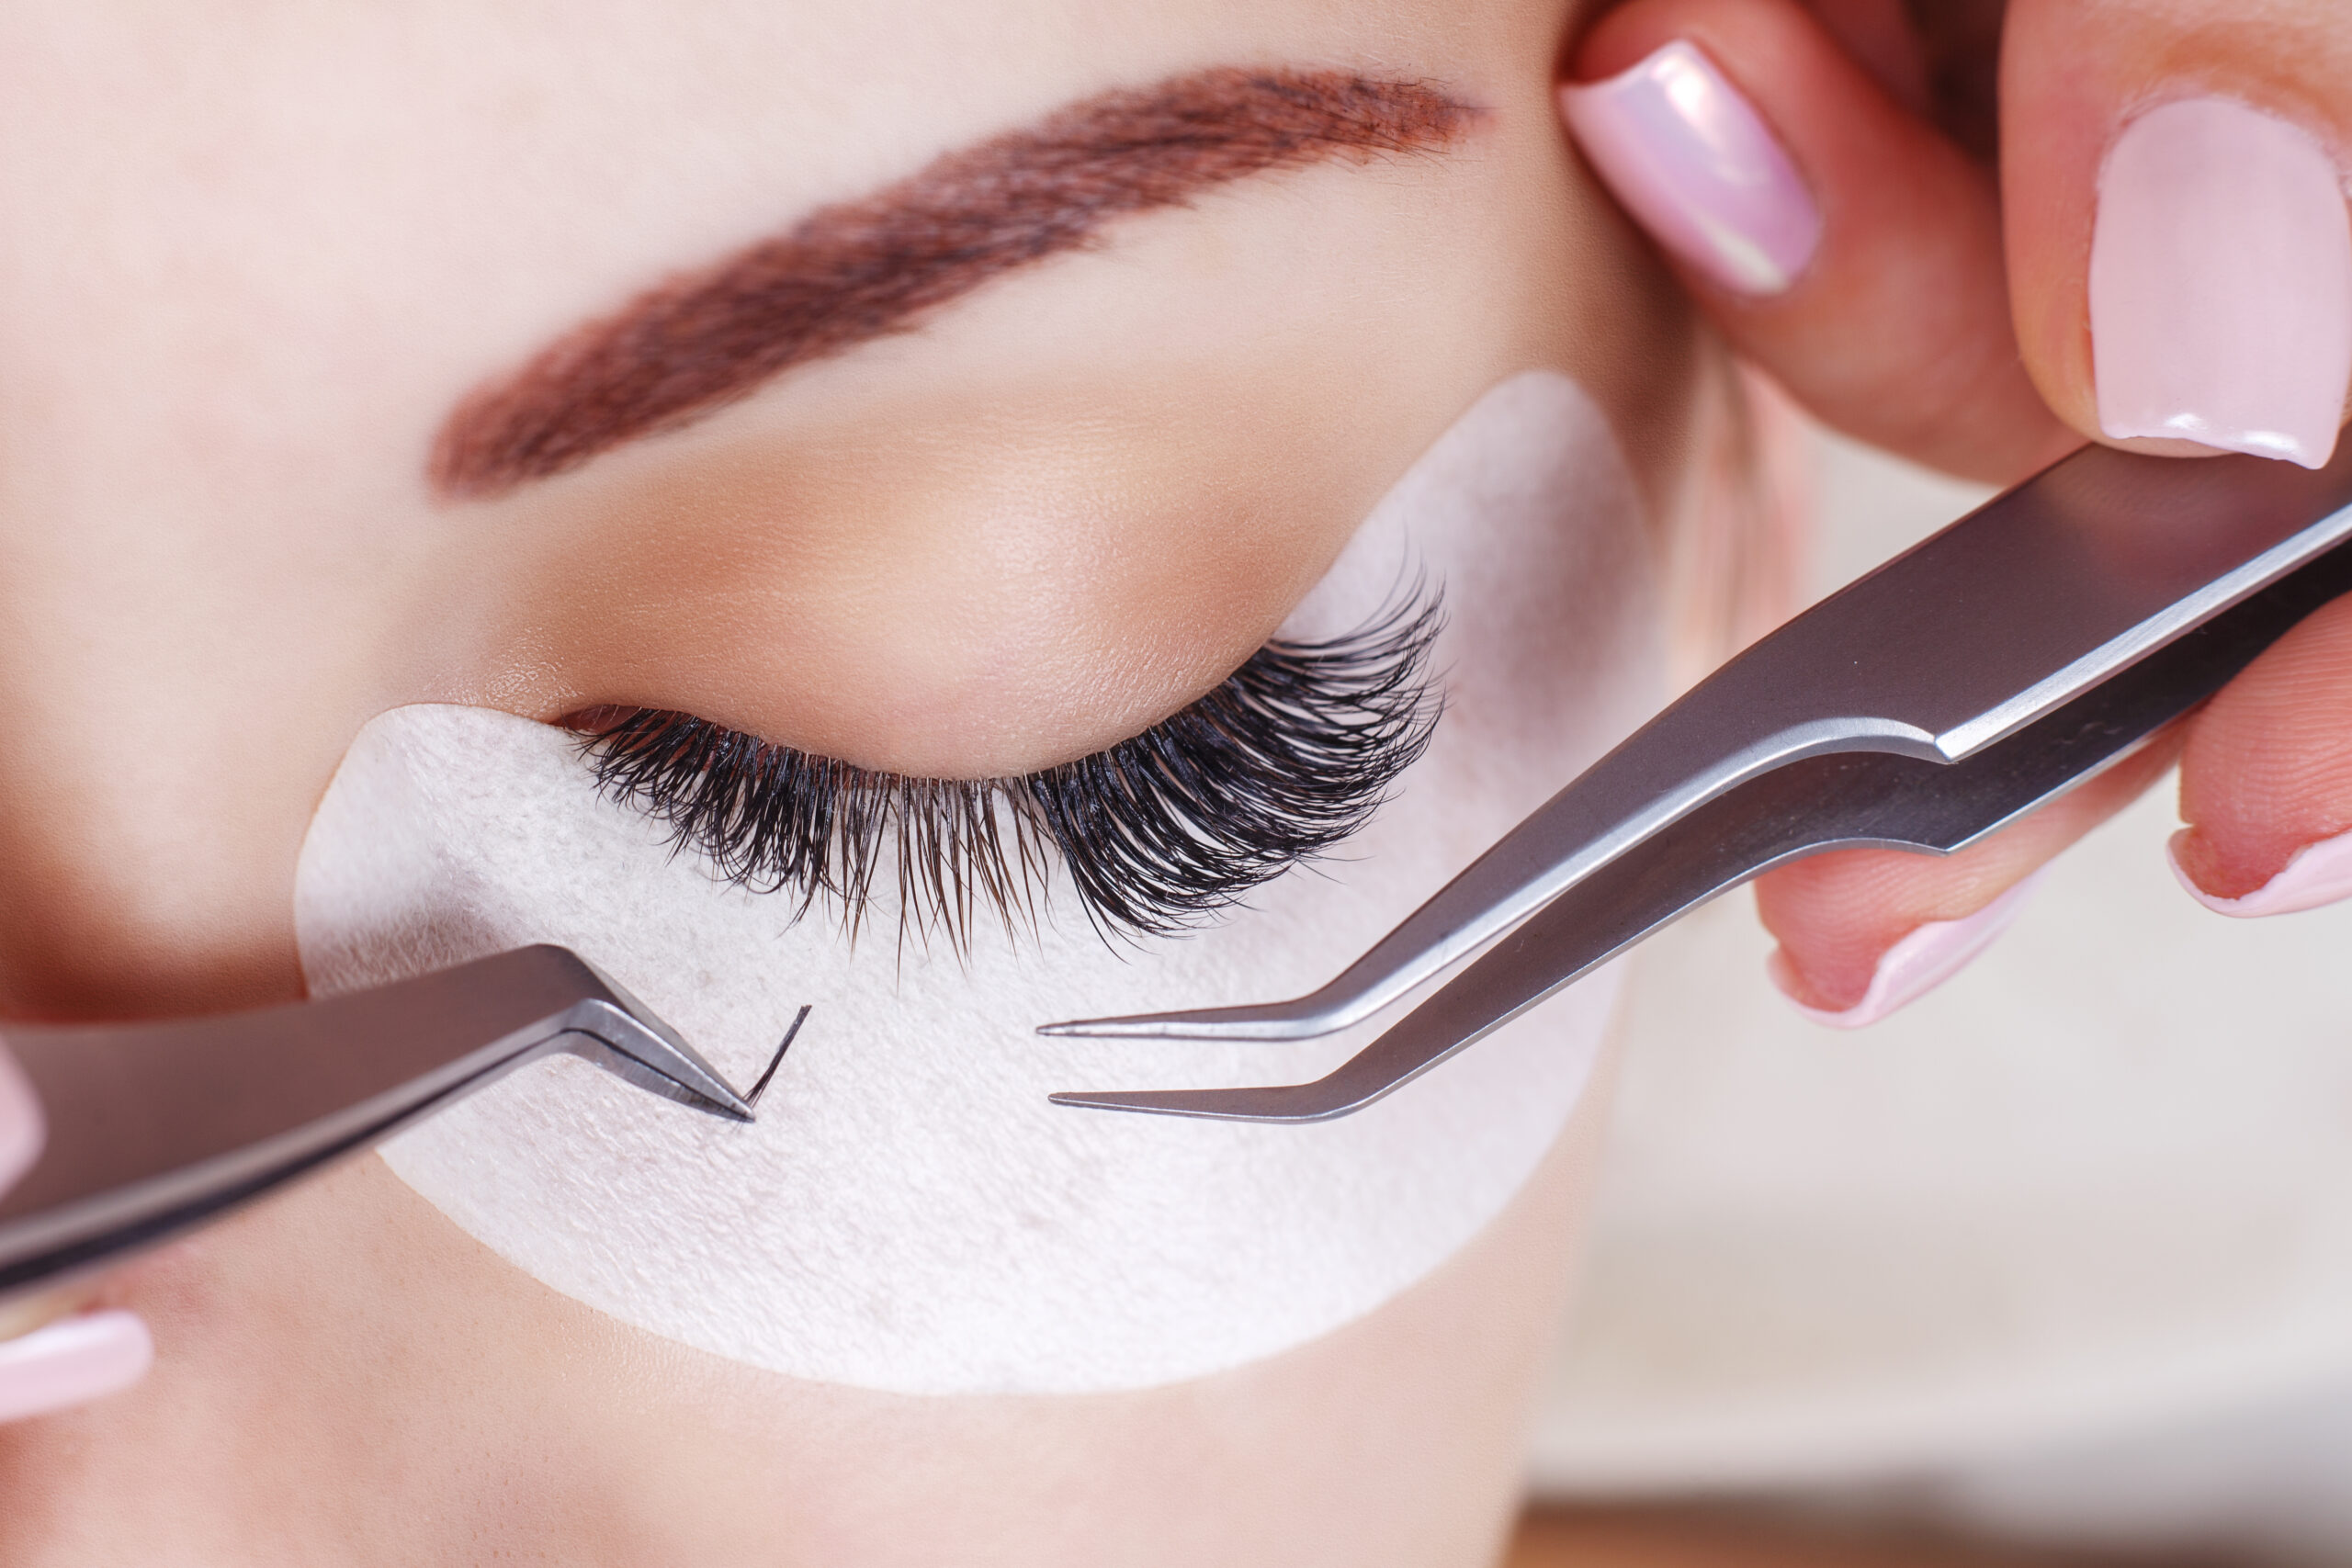 How to Remove Eyelash Extensions (Without Ruining Your Lashes)